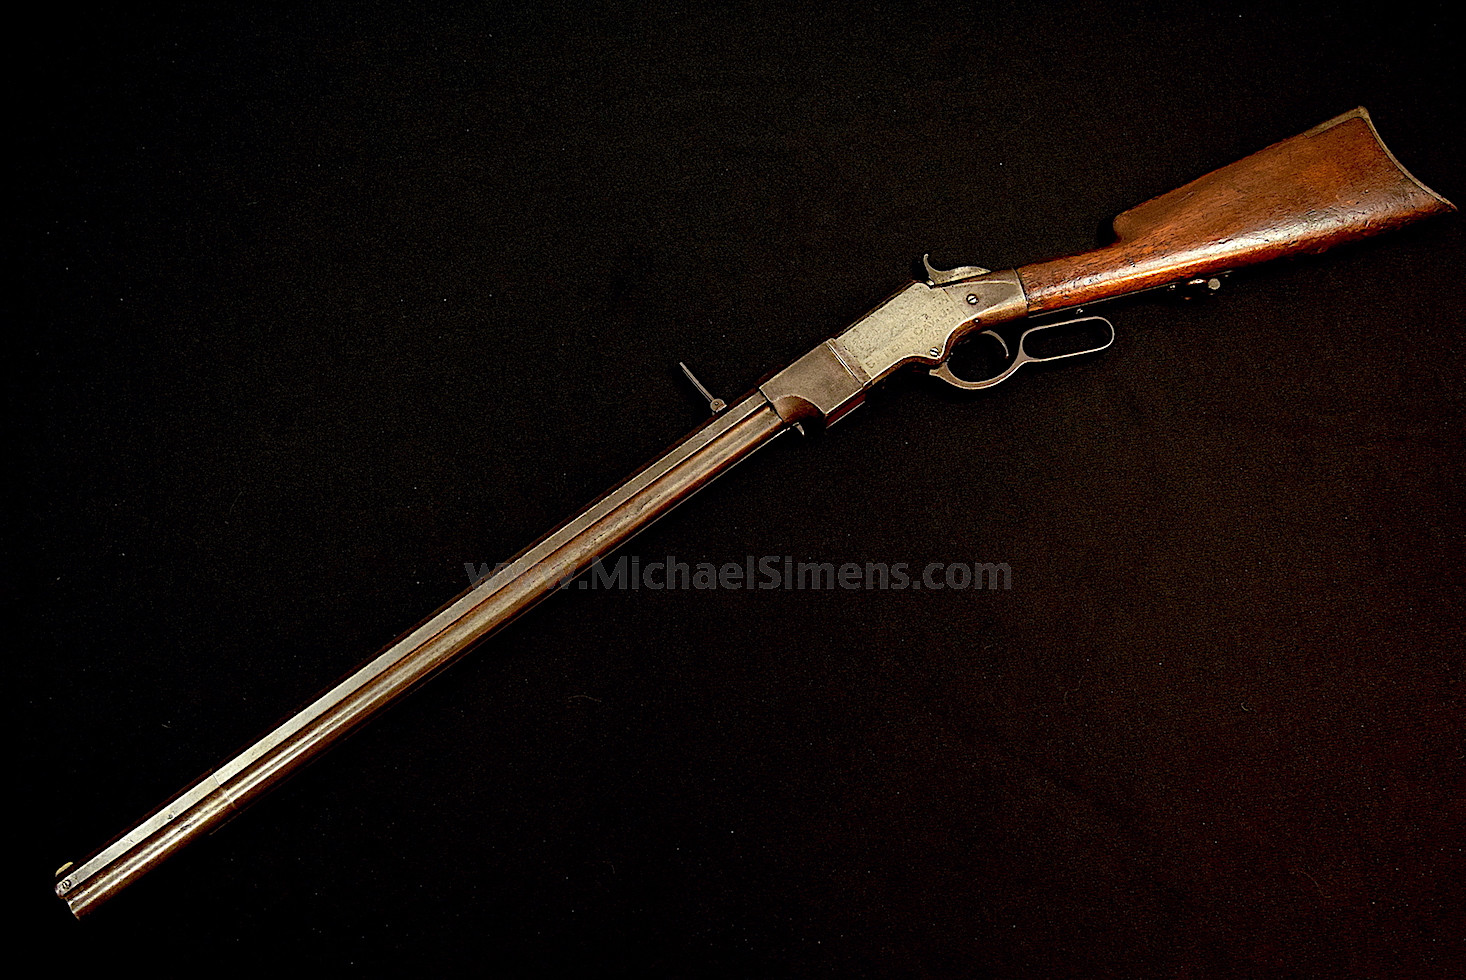 IRON FRAME HENRY RIFLE FOR SALE, HISTORICALLY INSCRIBED